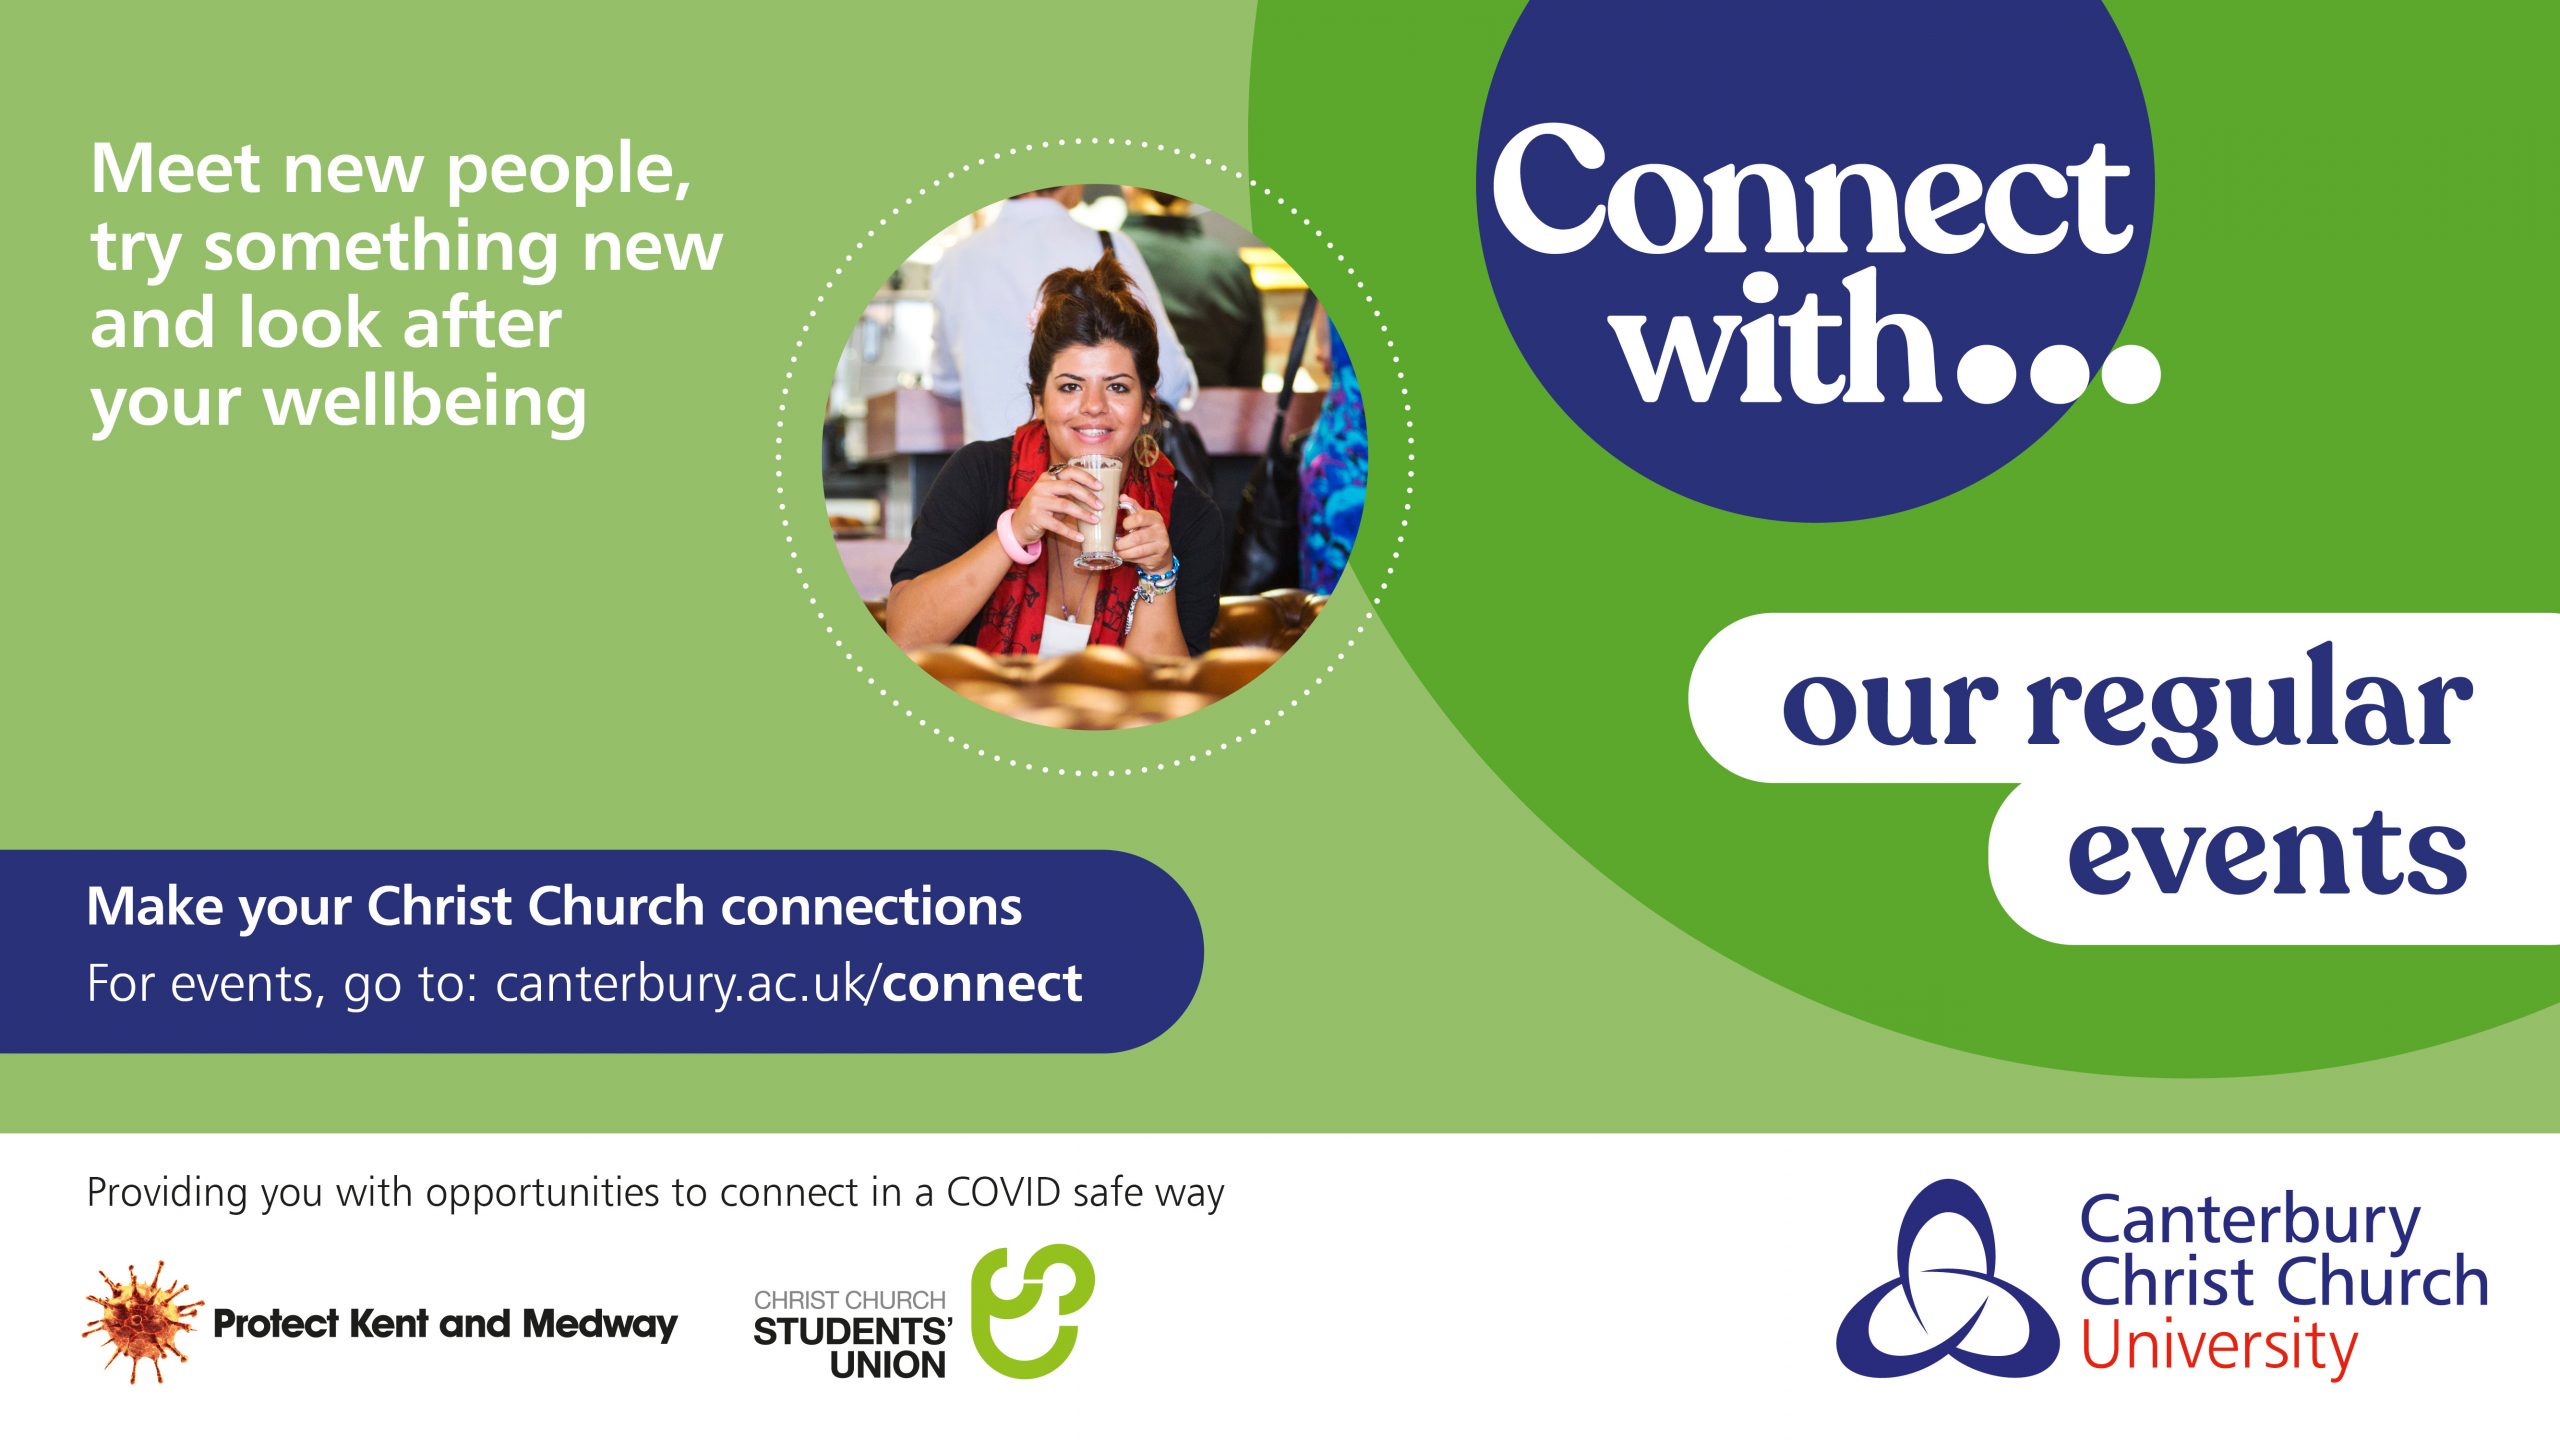 Connect events are back – what will you give a go in 2022